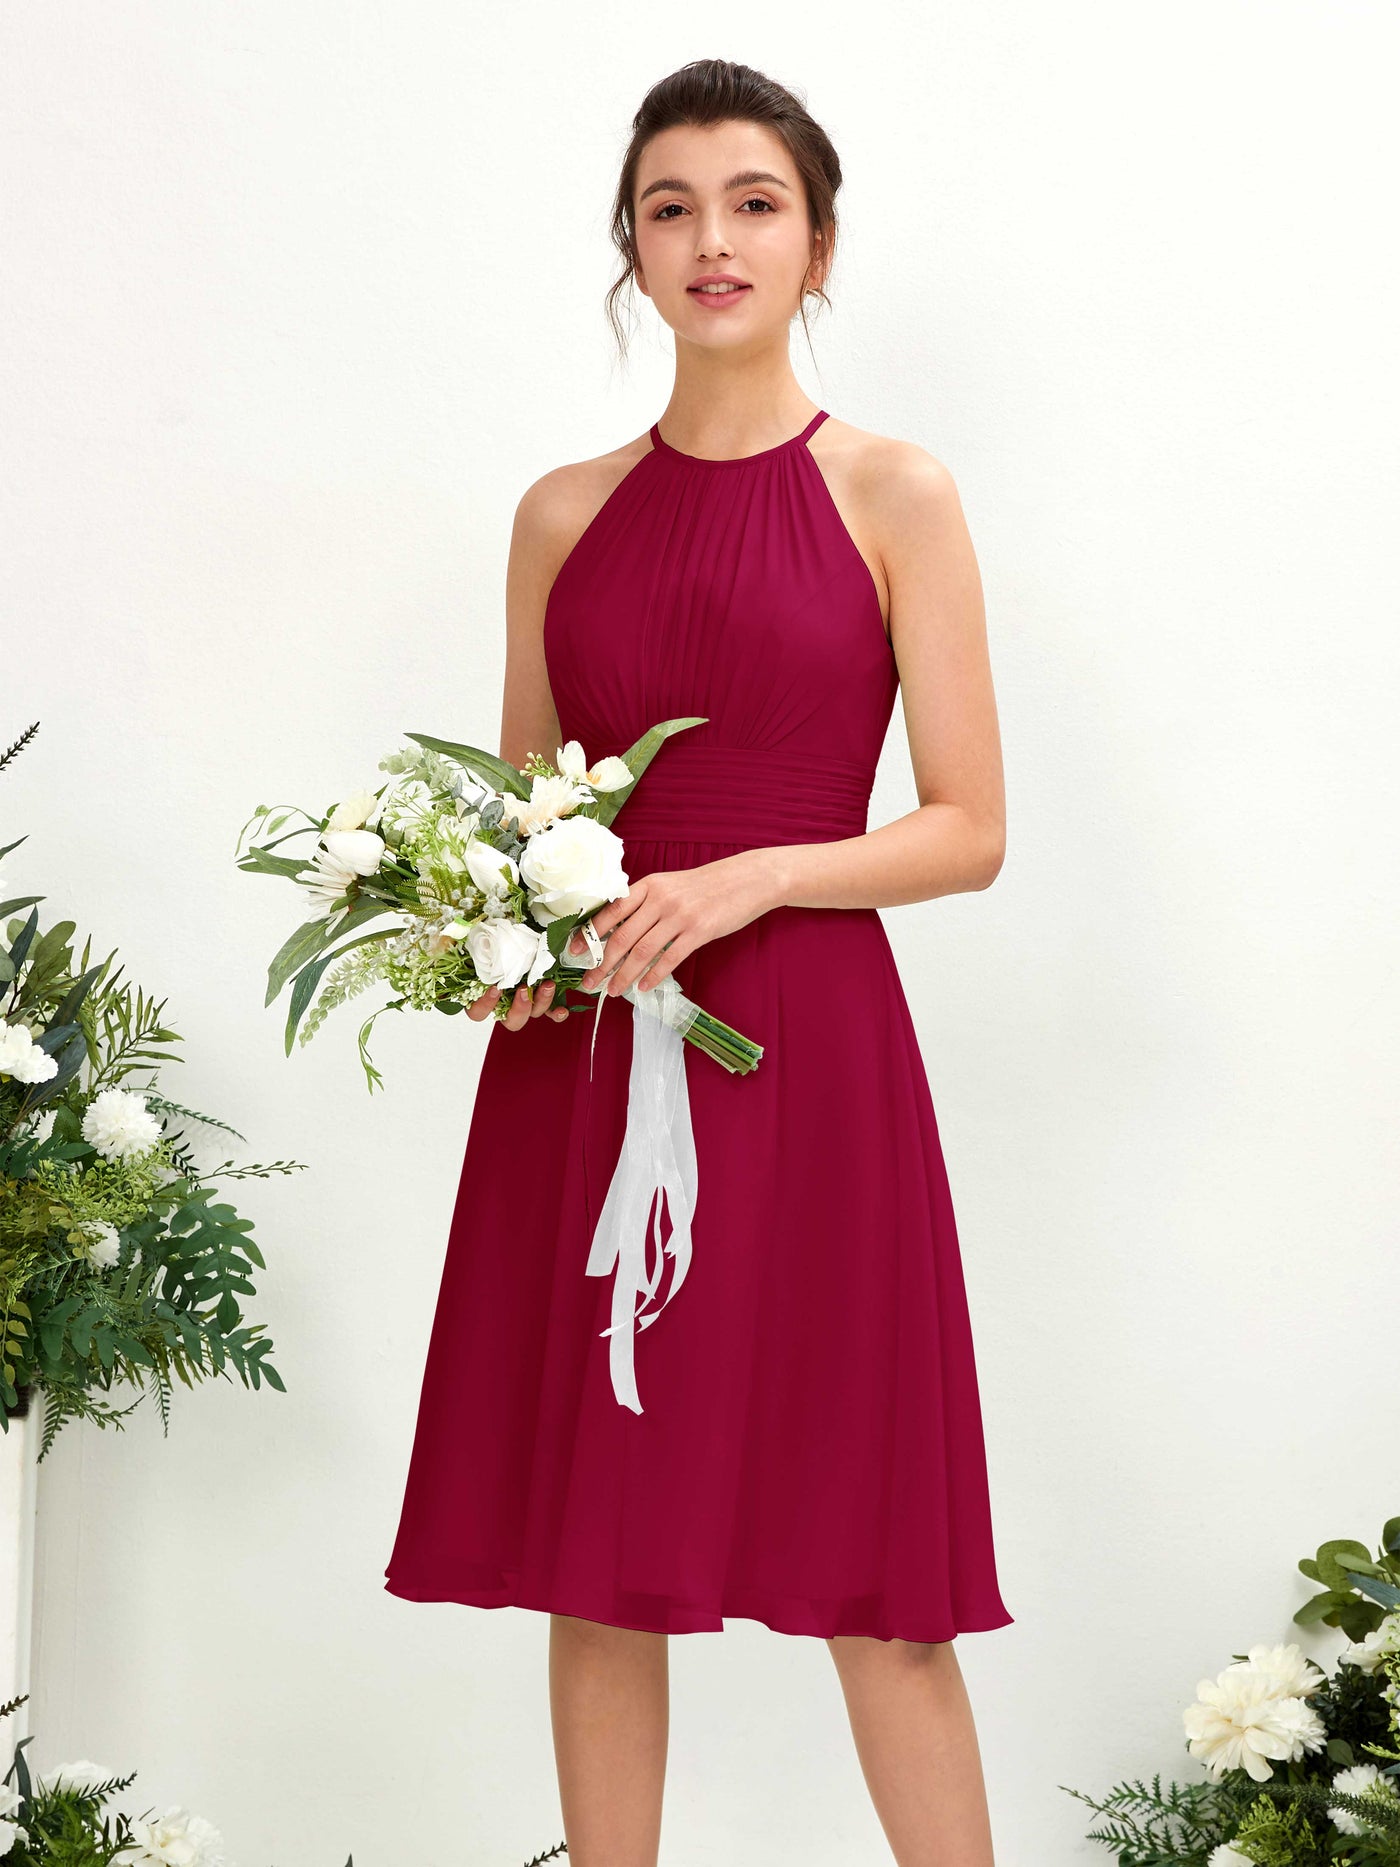 Jester Red Bridesmaid Dresses Bridesmaid Dress A-line Chiffon Halter Knee Length Sleeveless Wedding Party Dress (81220141)#color_jester-red